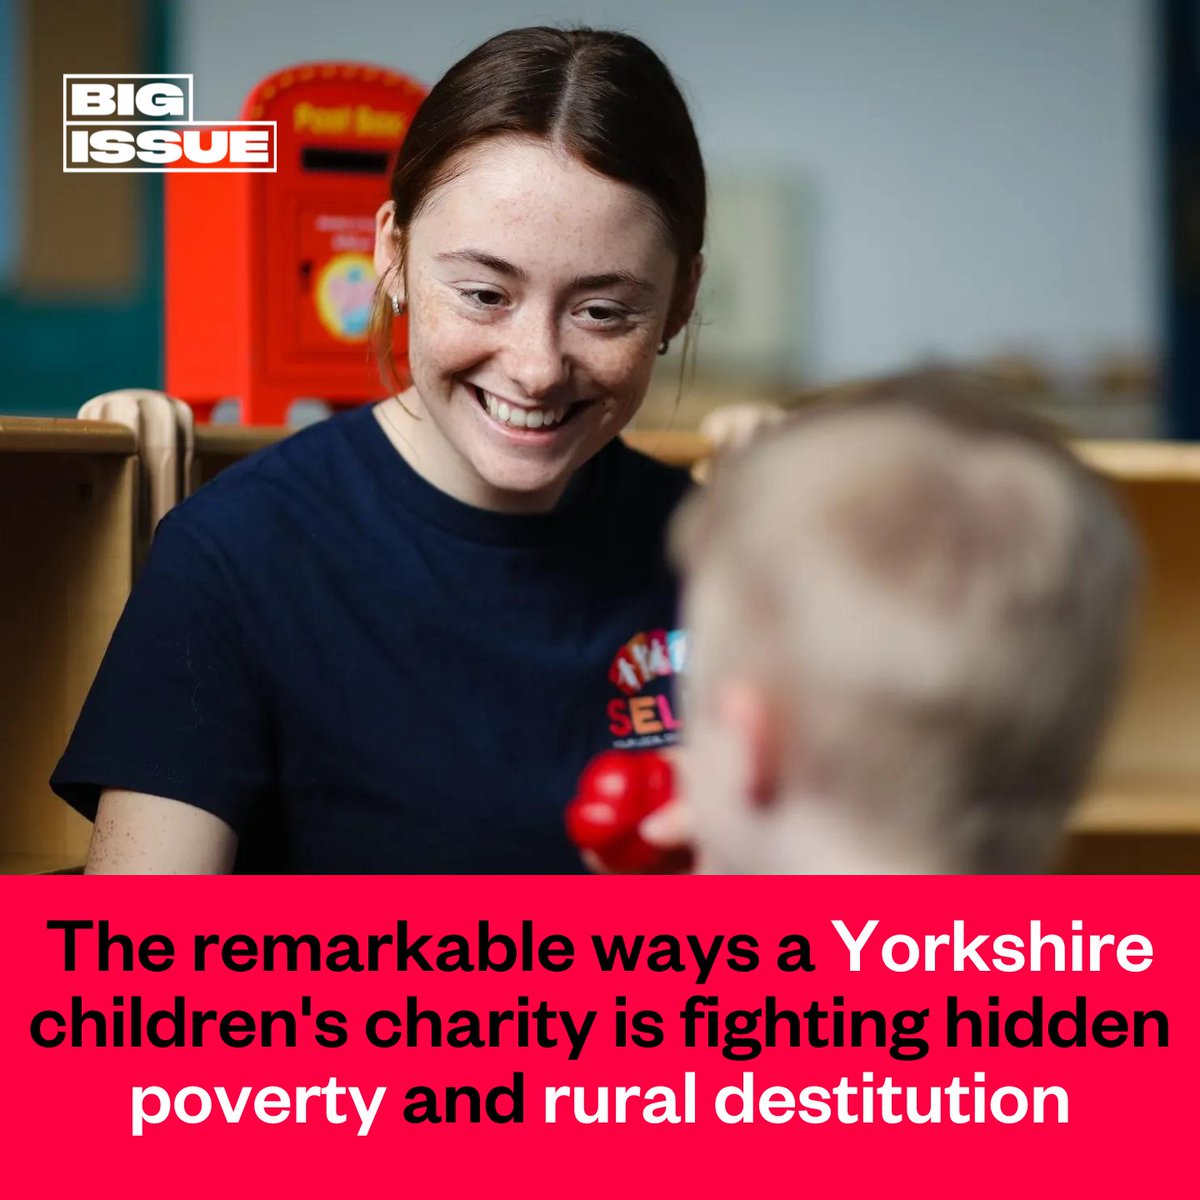 Nestled against the Yorkshire Dales is Skipton, a market town full of beautiful scenery. 🌳 But a shadow of deep poverty is leaving generations of young people with difficult childhoods. @BronteSchiltz meets the charity trying to change that. ⬇️ bigissue.com/news/activism/…